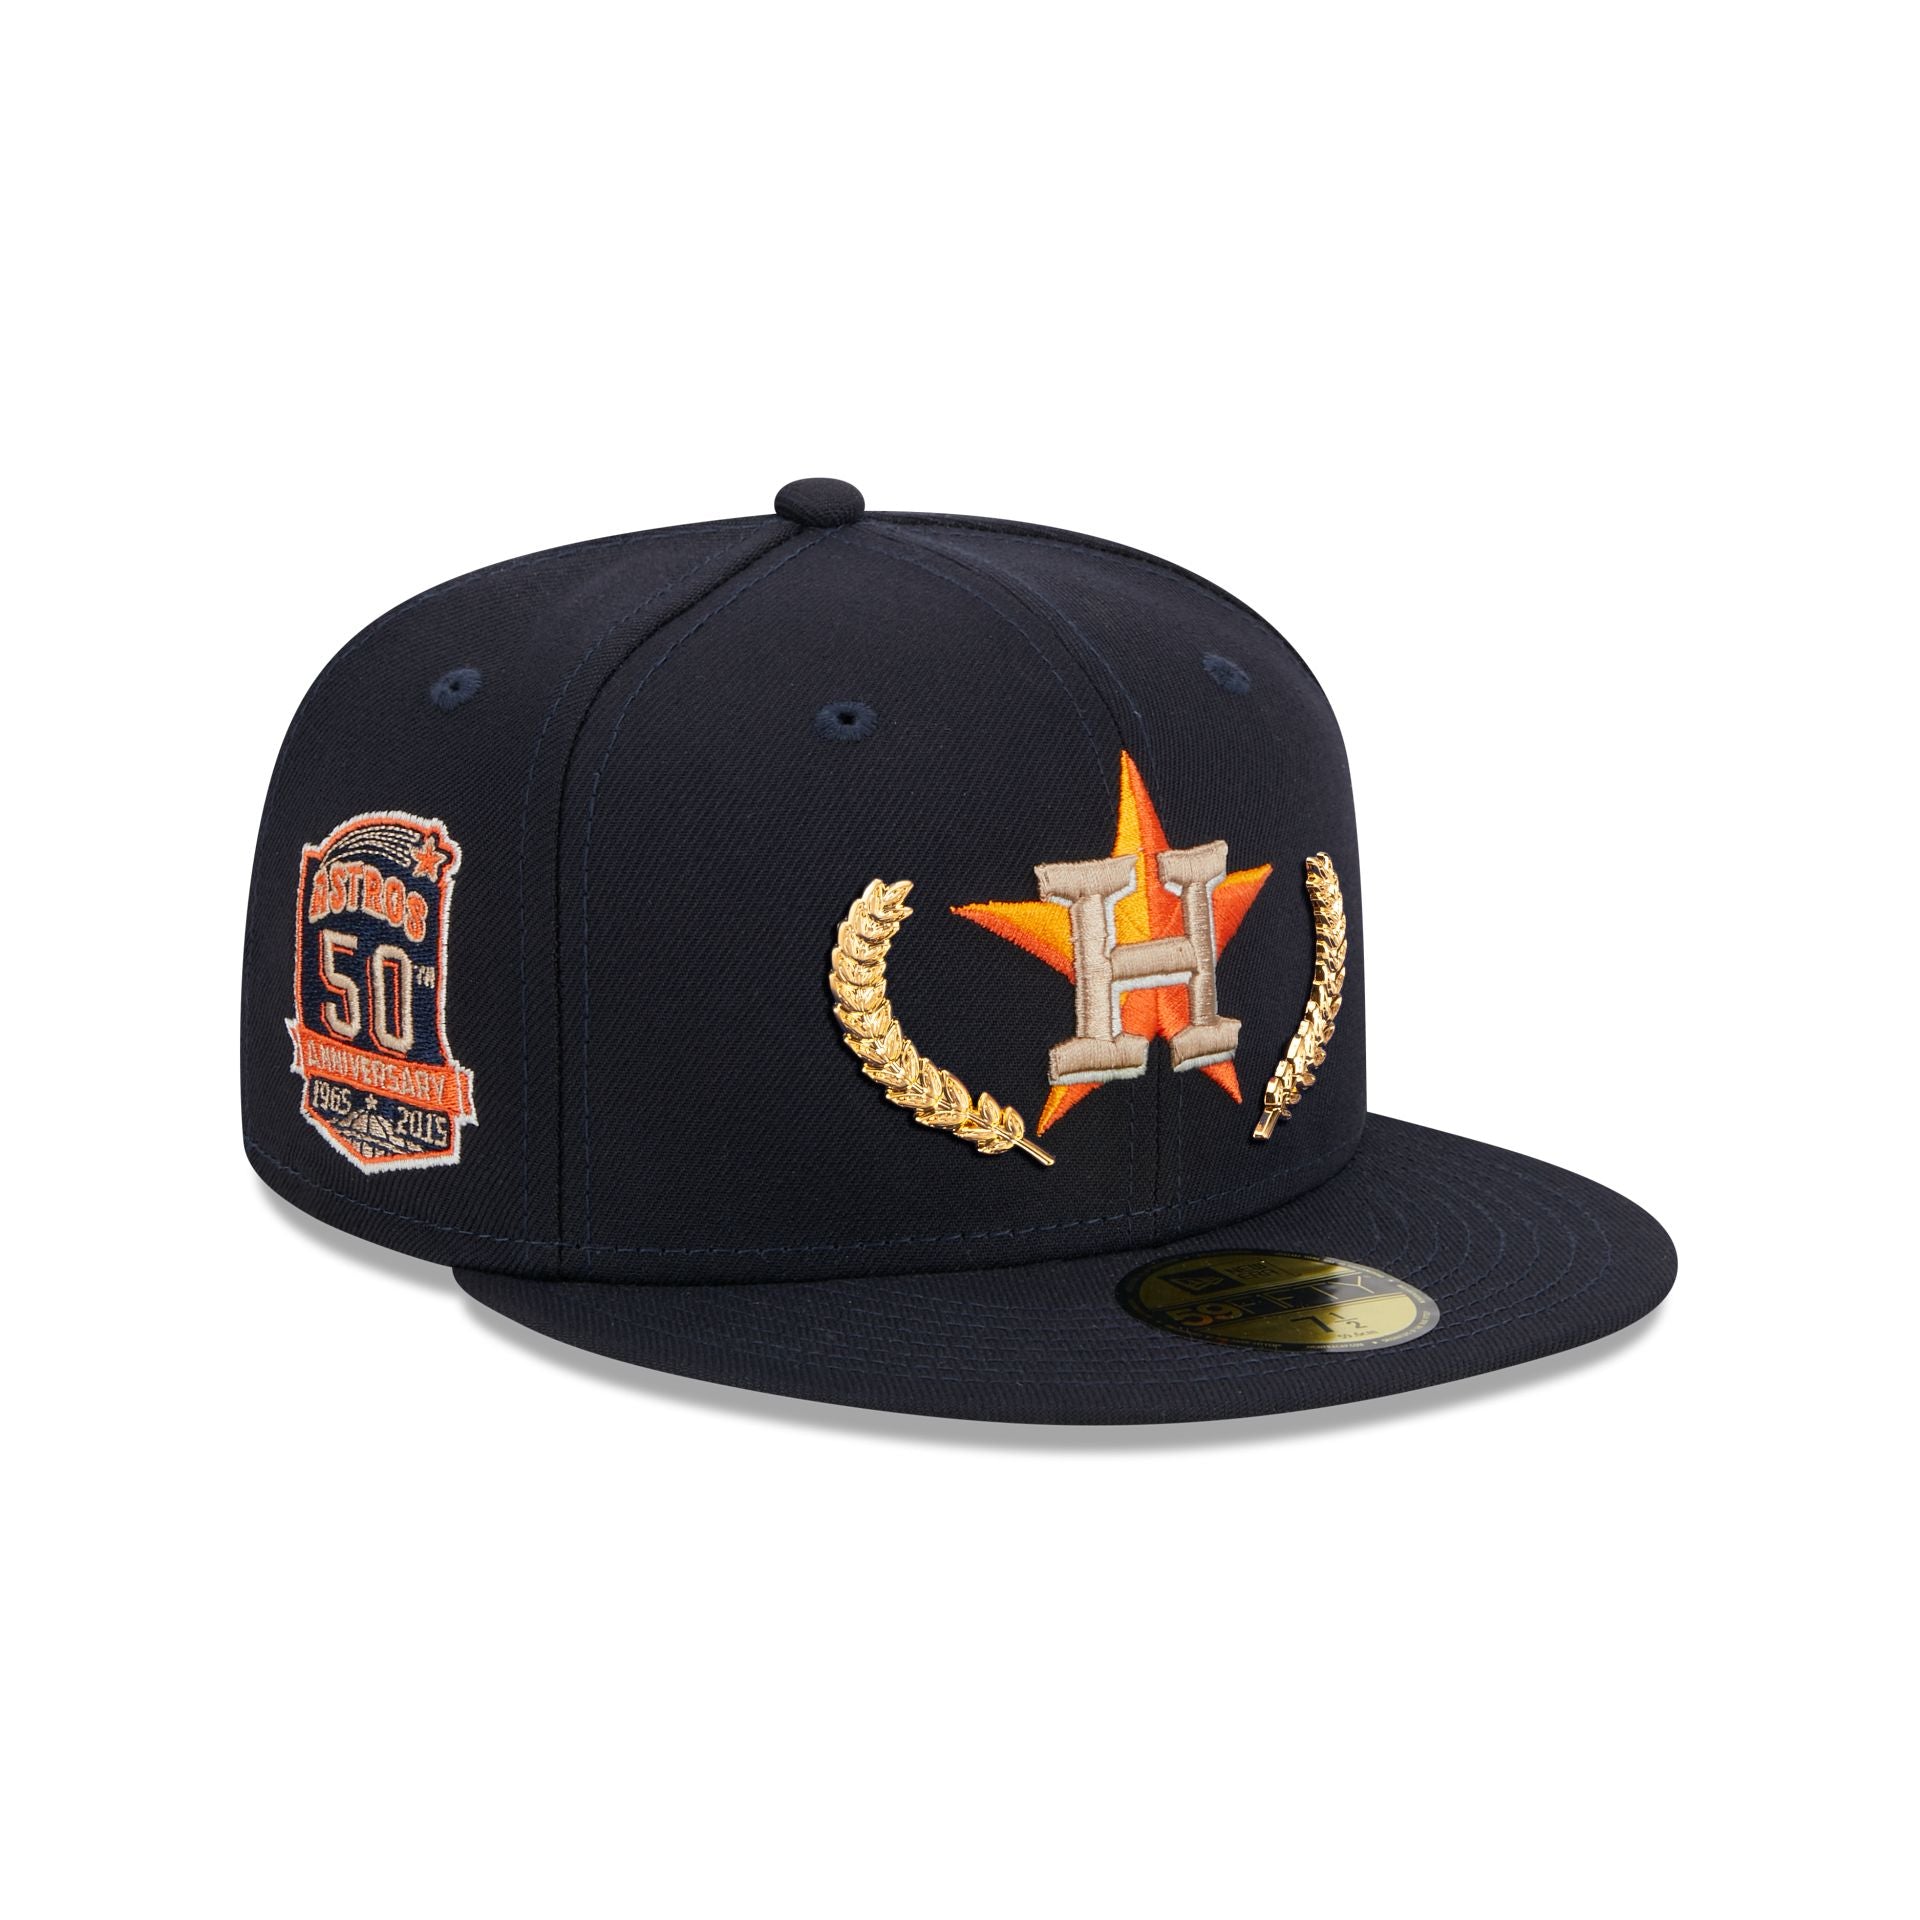 Men's New Era Vegas Gold/Cardinal Houston Astros 59FIFTY Fitted Hat